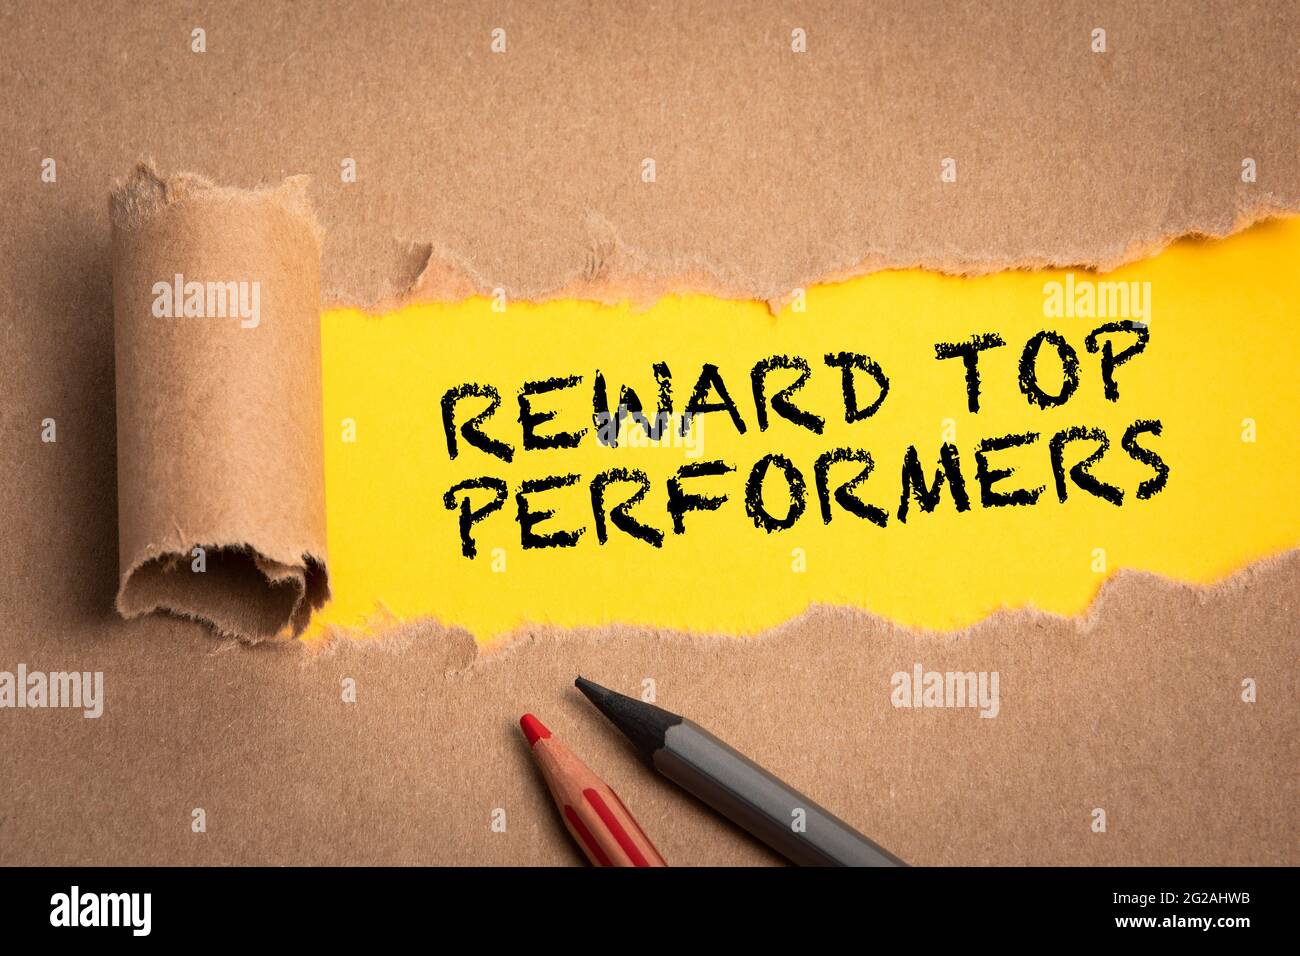 Reward top performers. Torn cardboard on a yellow background. Stock Photo